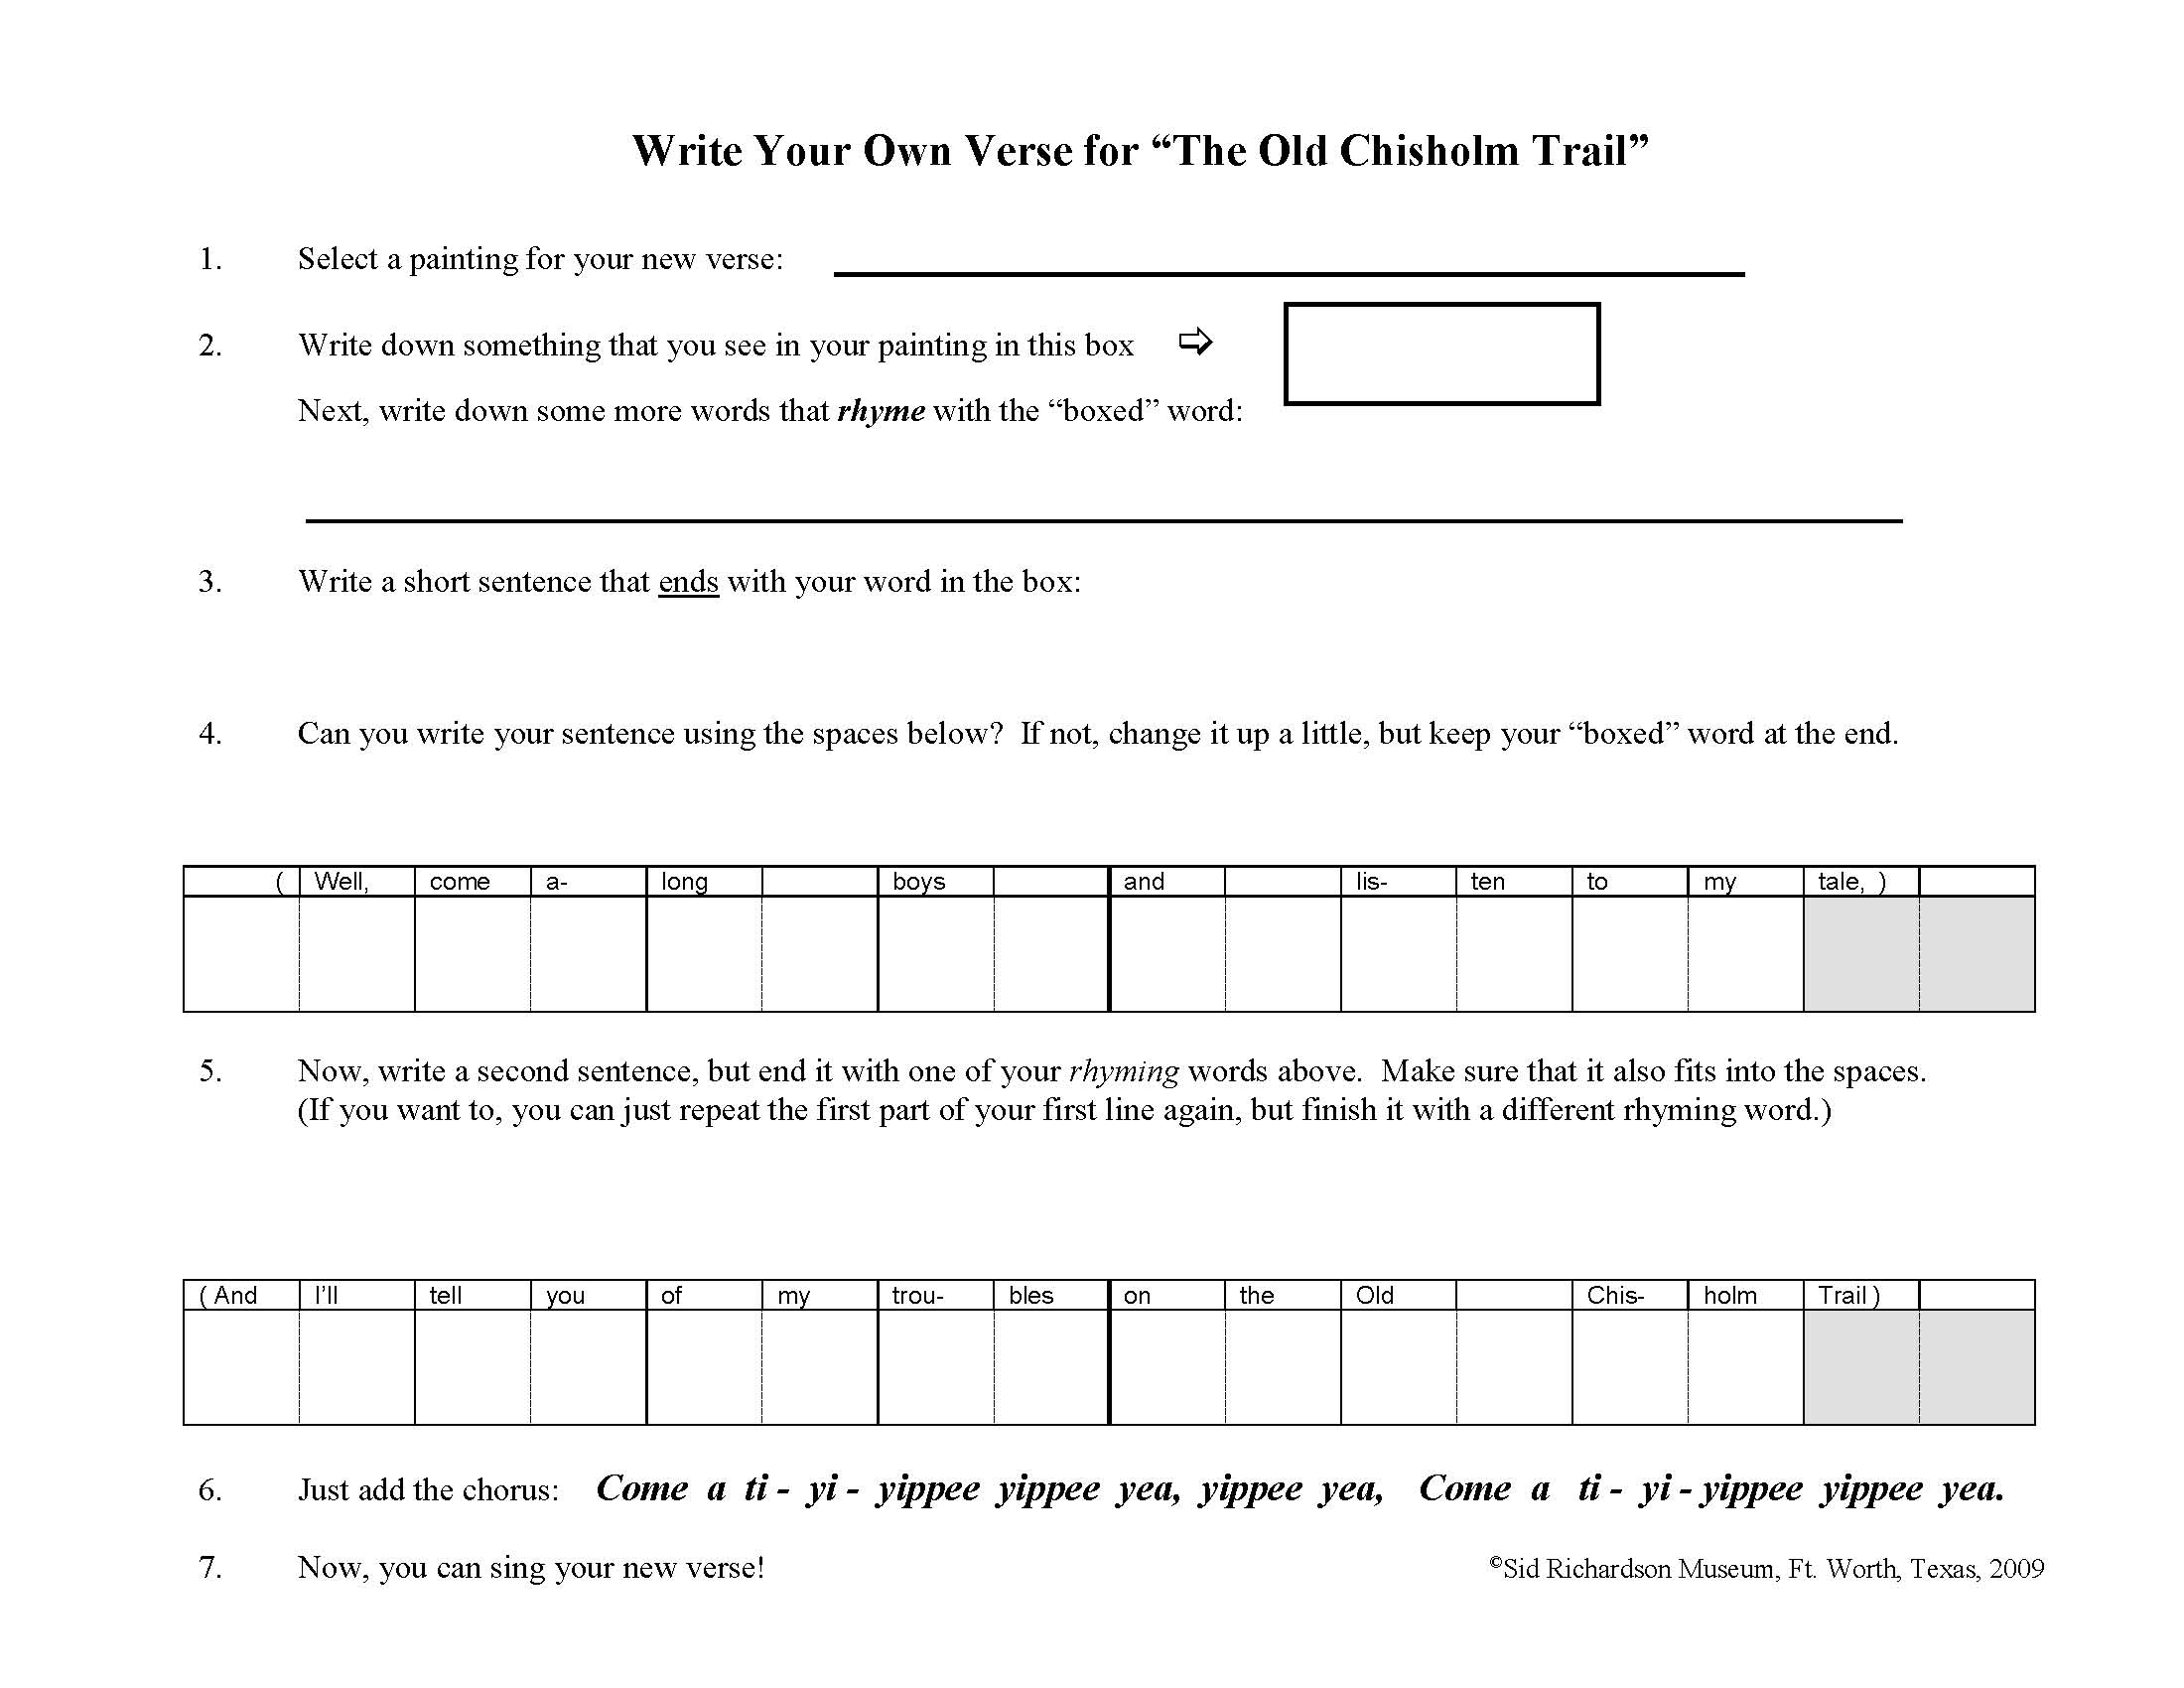 Activity worksheet with instructions for writing your own verse